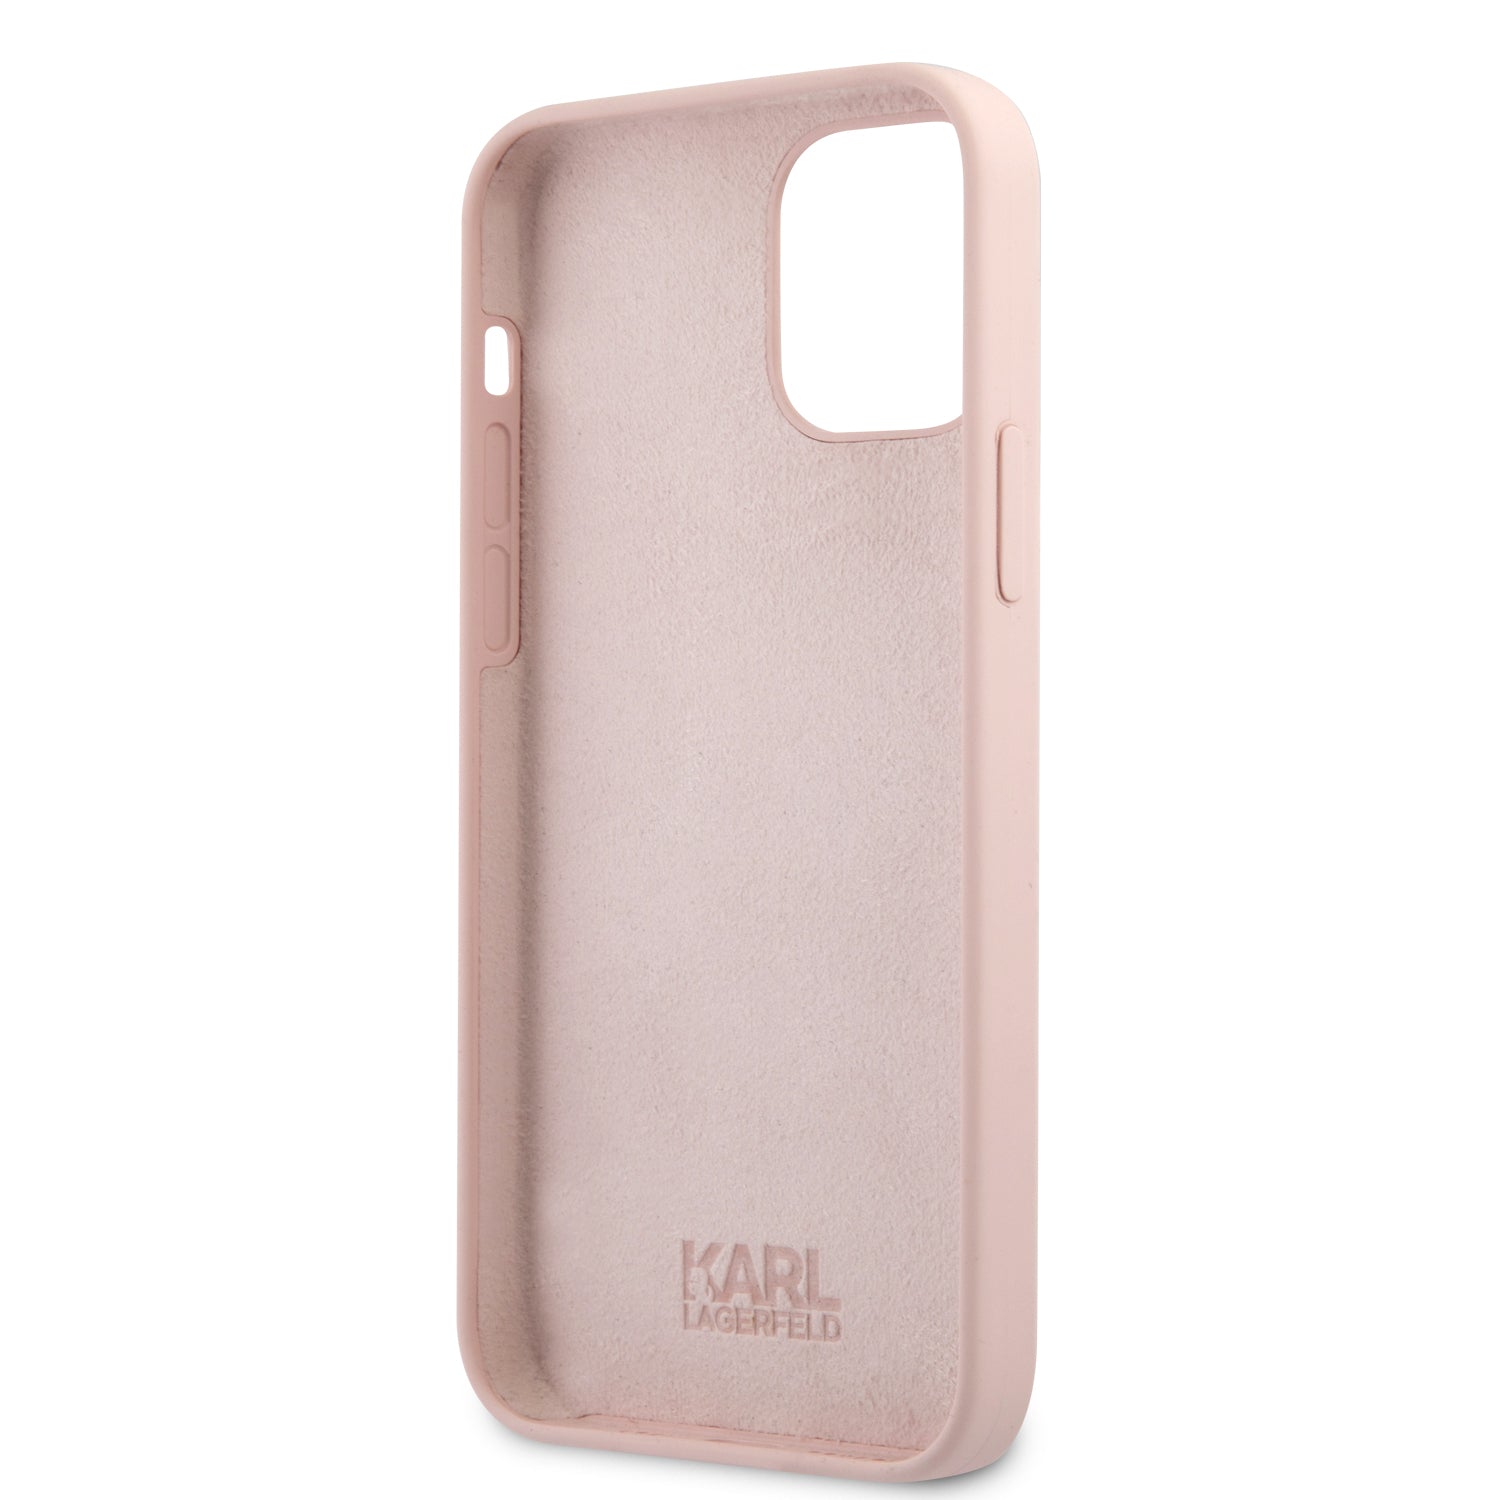 Buy Light Pink Silicon Case For iPhone 12 mini